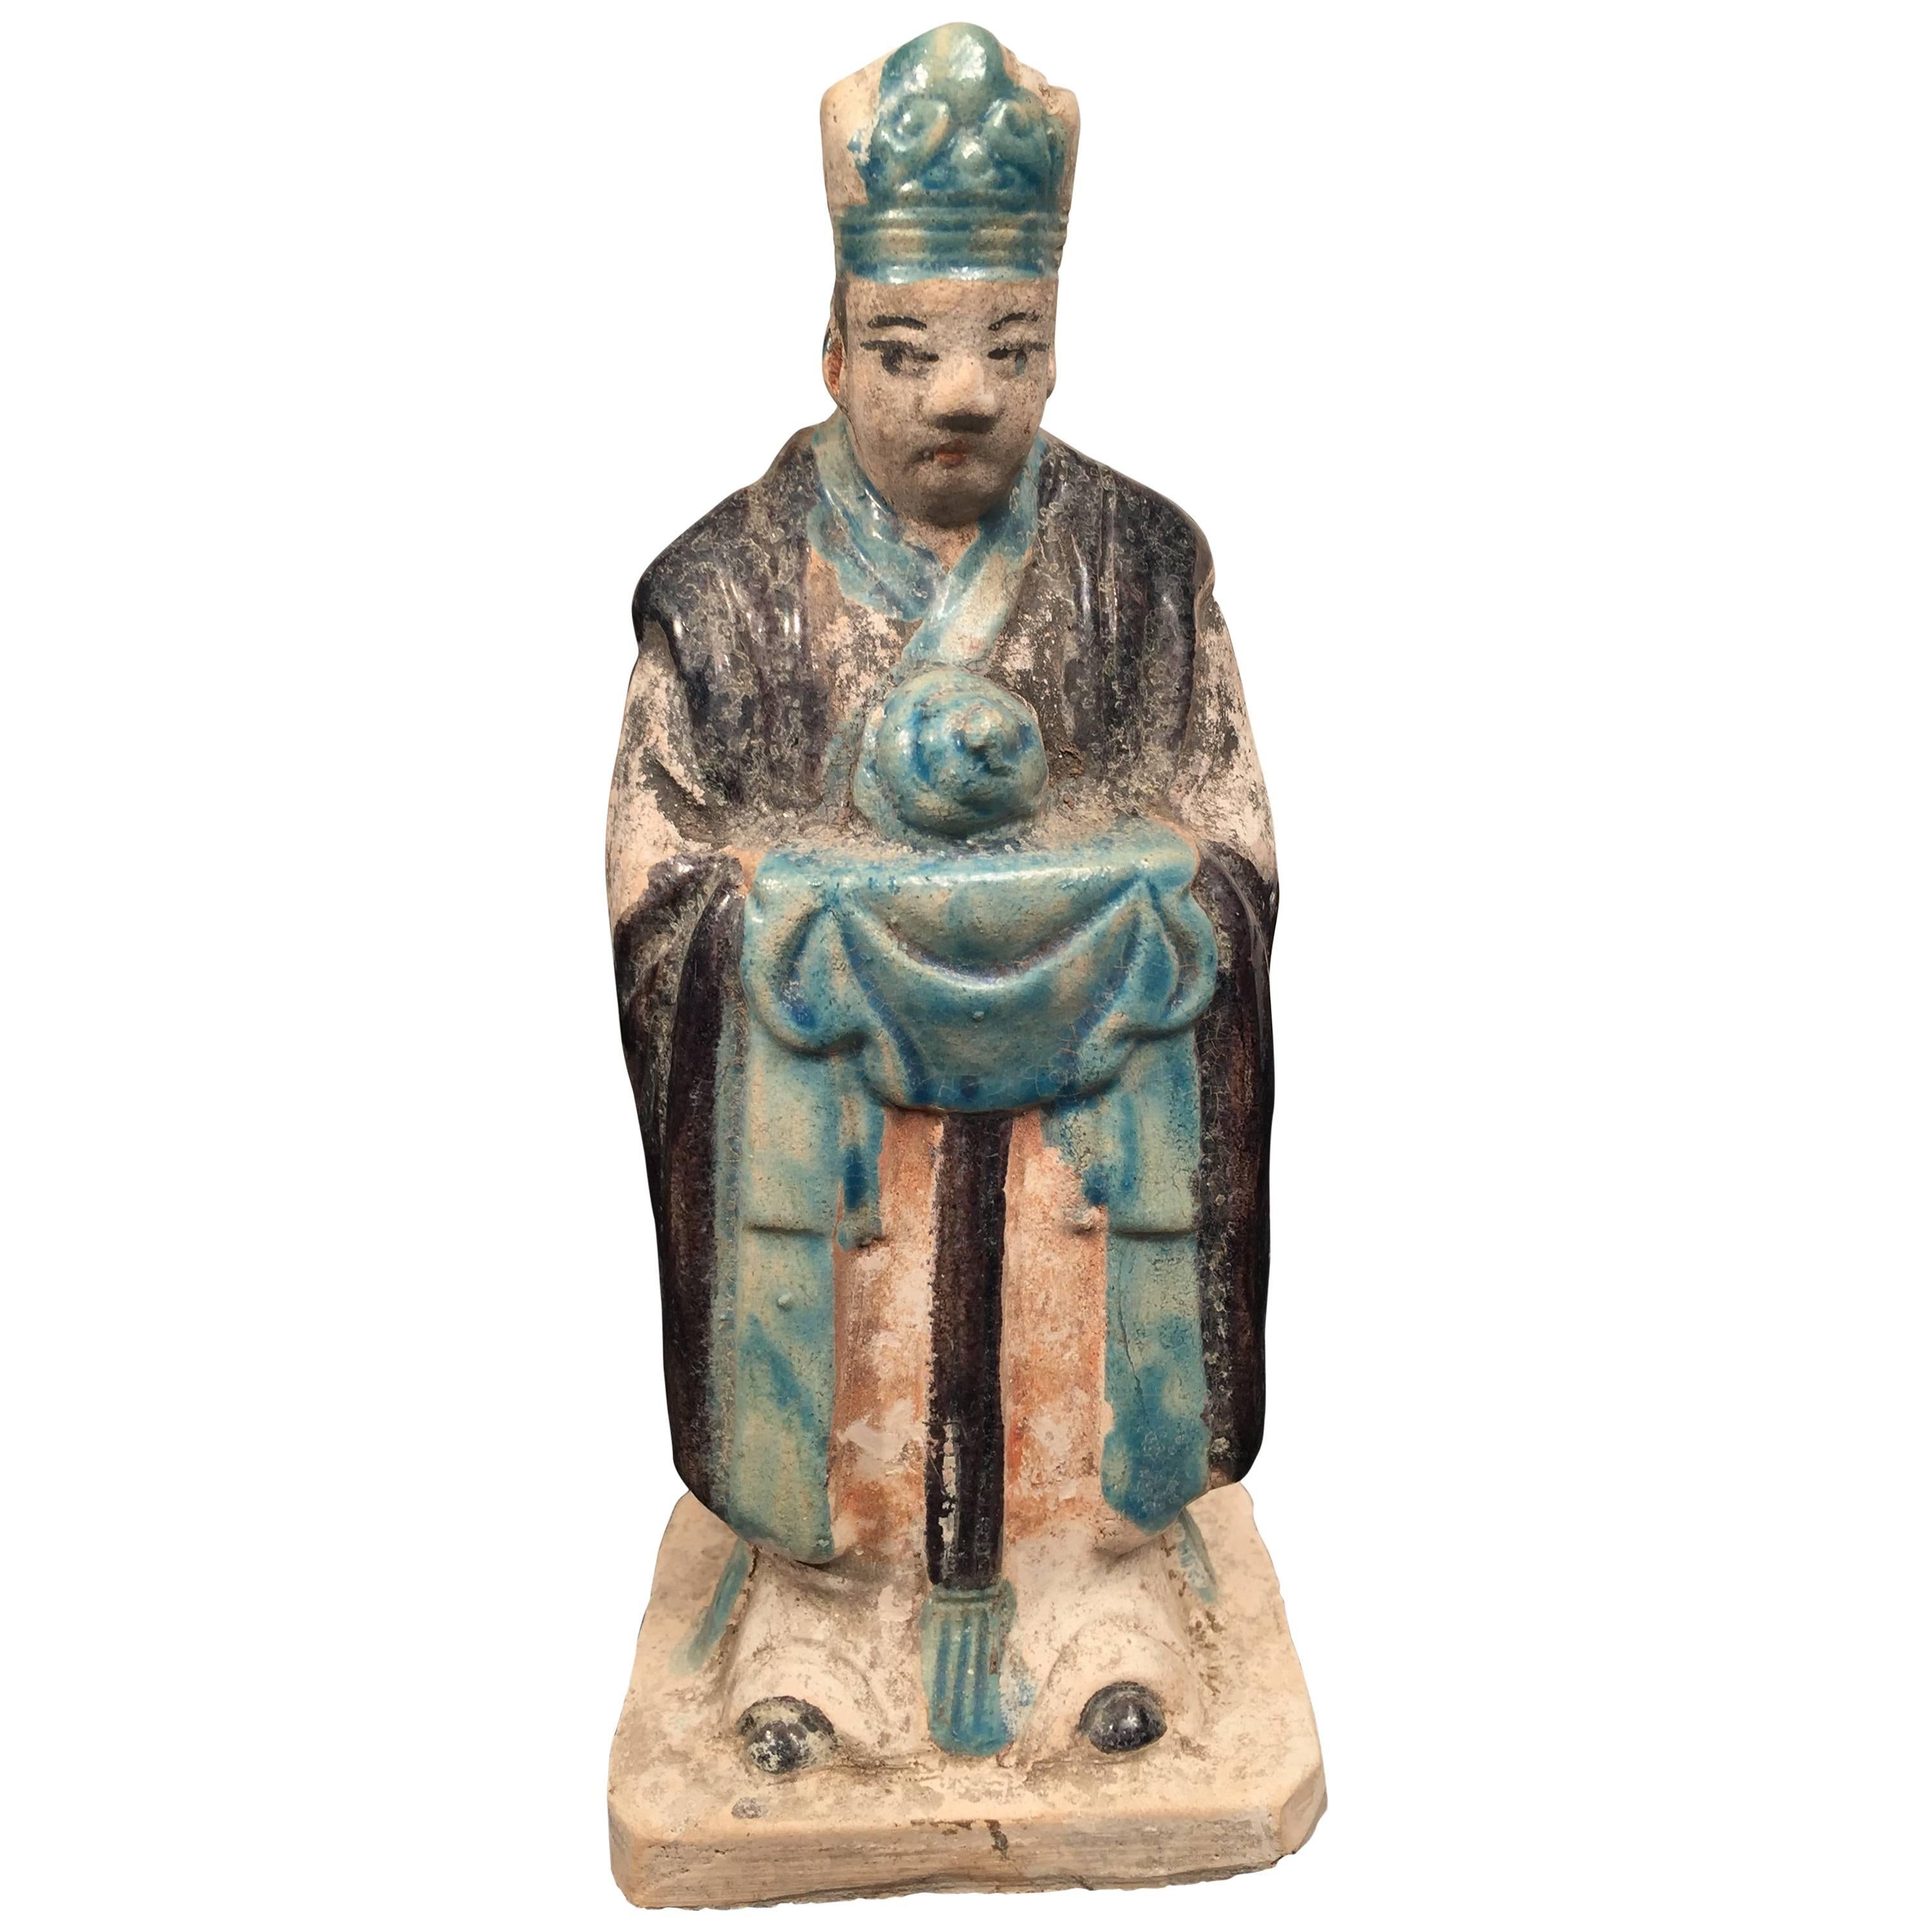 Important Ancient Chinese Zodiac Figure Holding a Snake, Ming Dynasty, 1368-1644